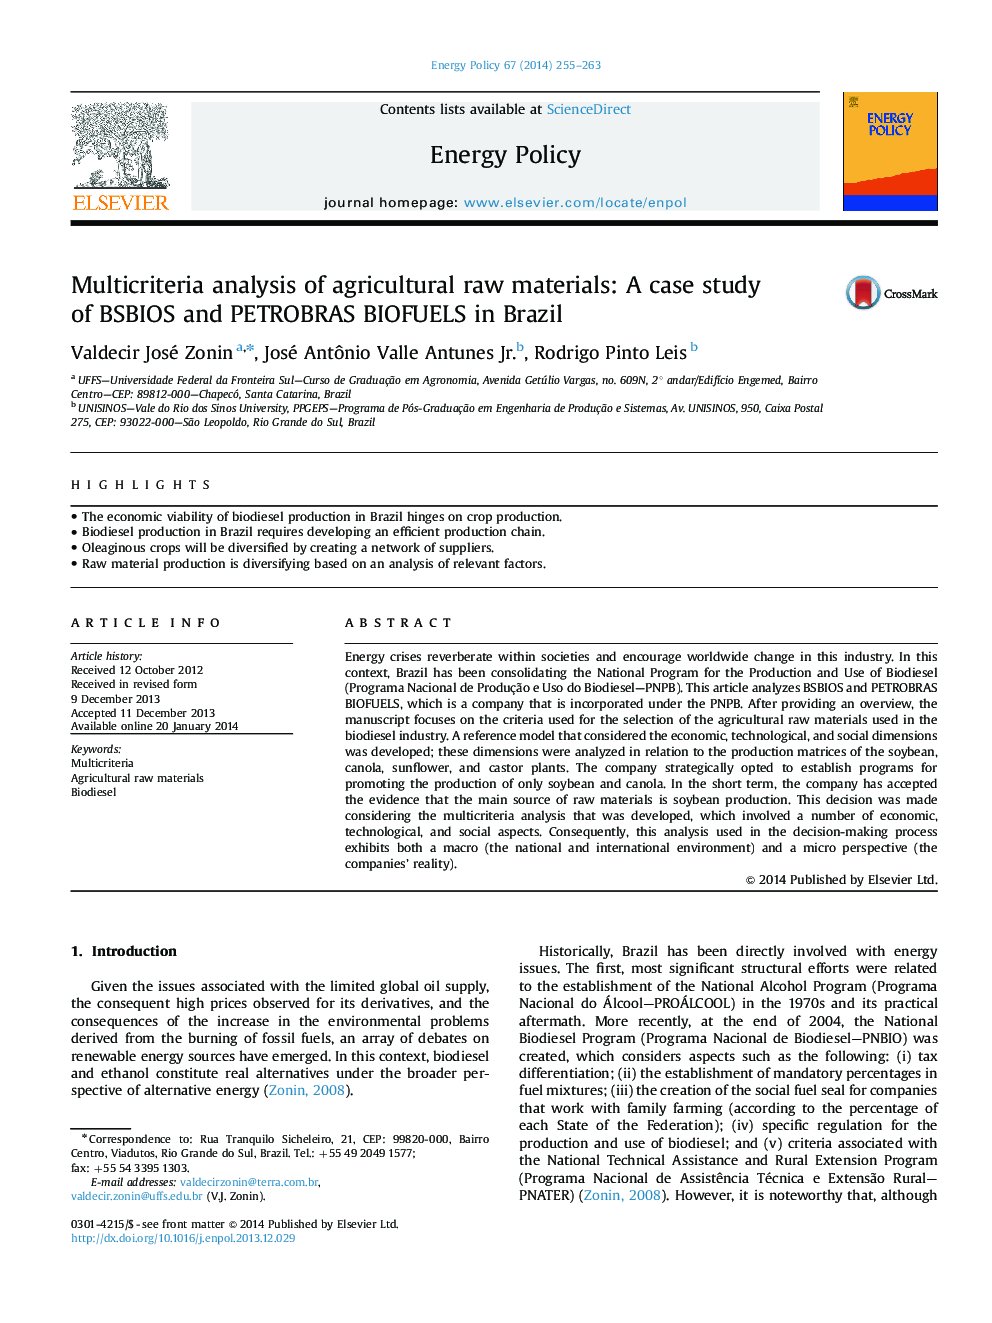 Multicriteria analysis of agricultural raw materials: A case study of BSBIOS and PETROBRAS BIOFUELS in Brazil